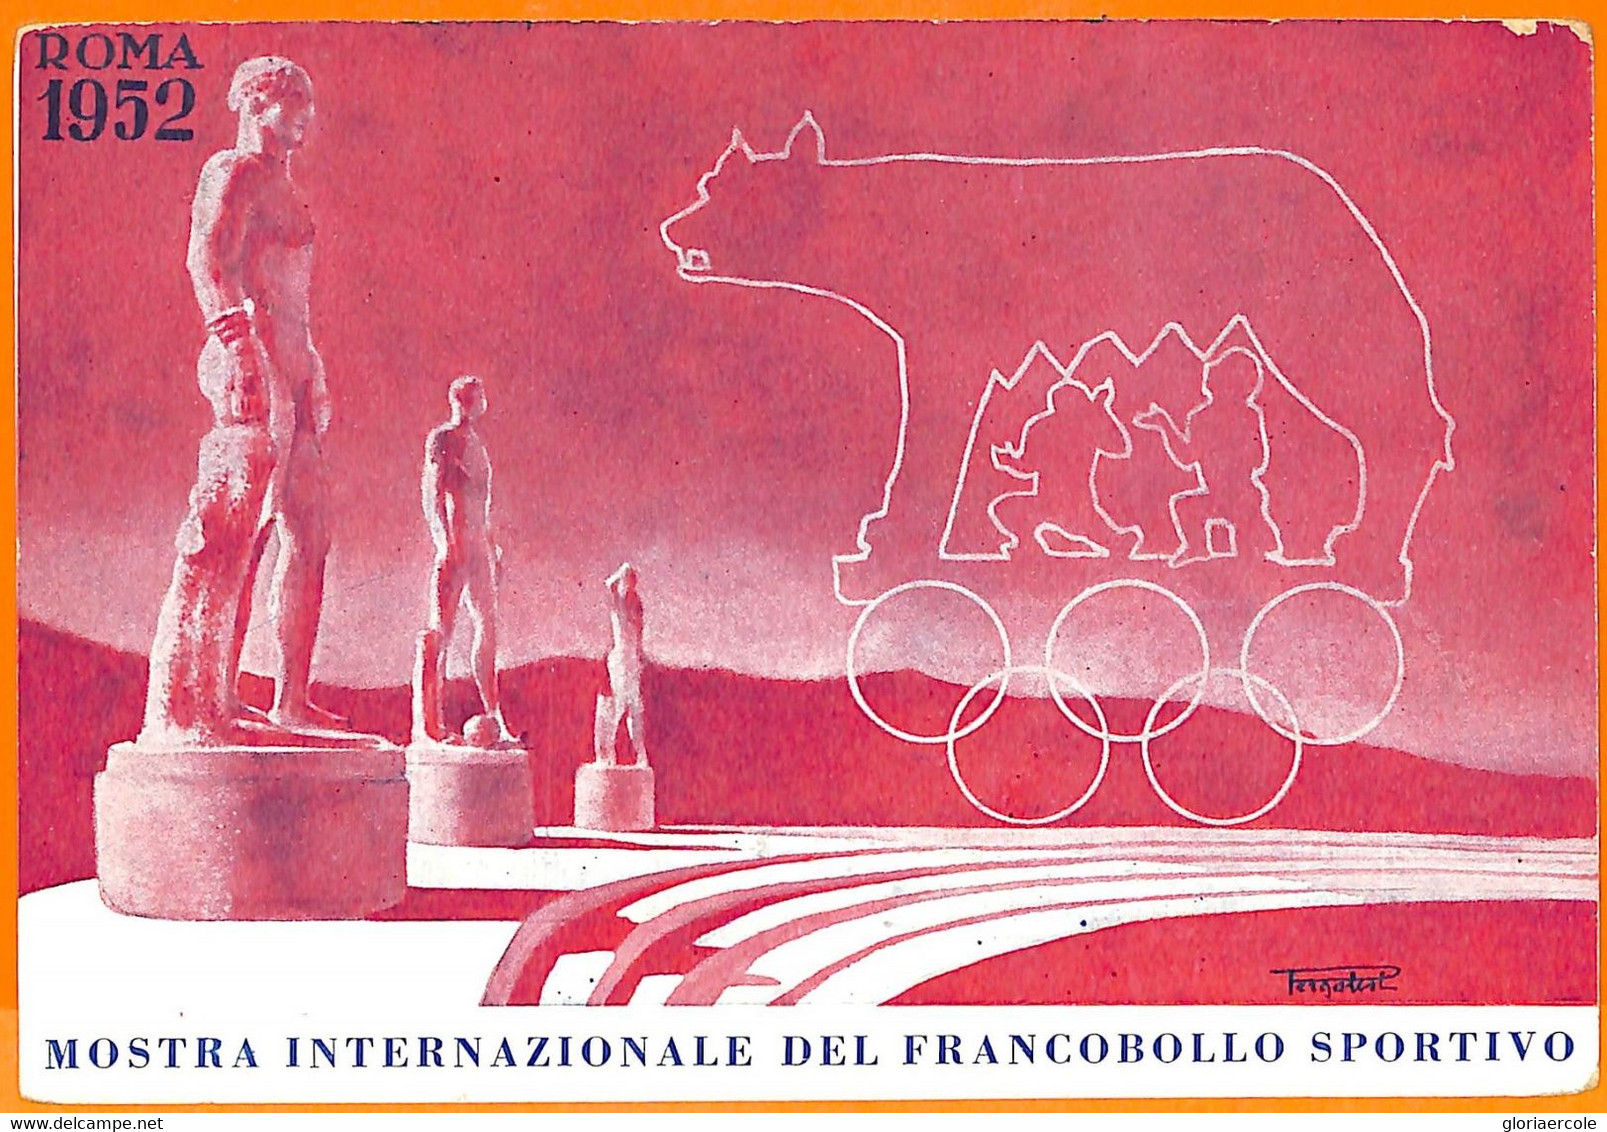 Aa2847 - Postal History - VINTAGE Illustrated CARD - 1952  Olympic Games ITALY - Zomer 1952: Helsinki